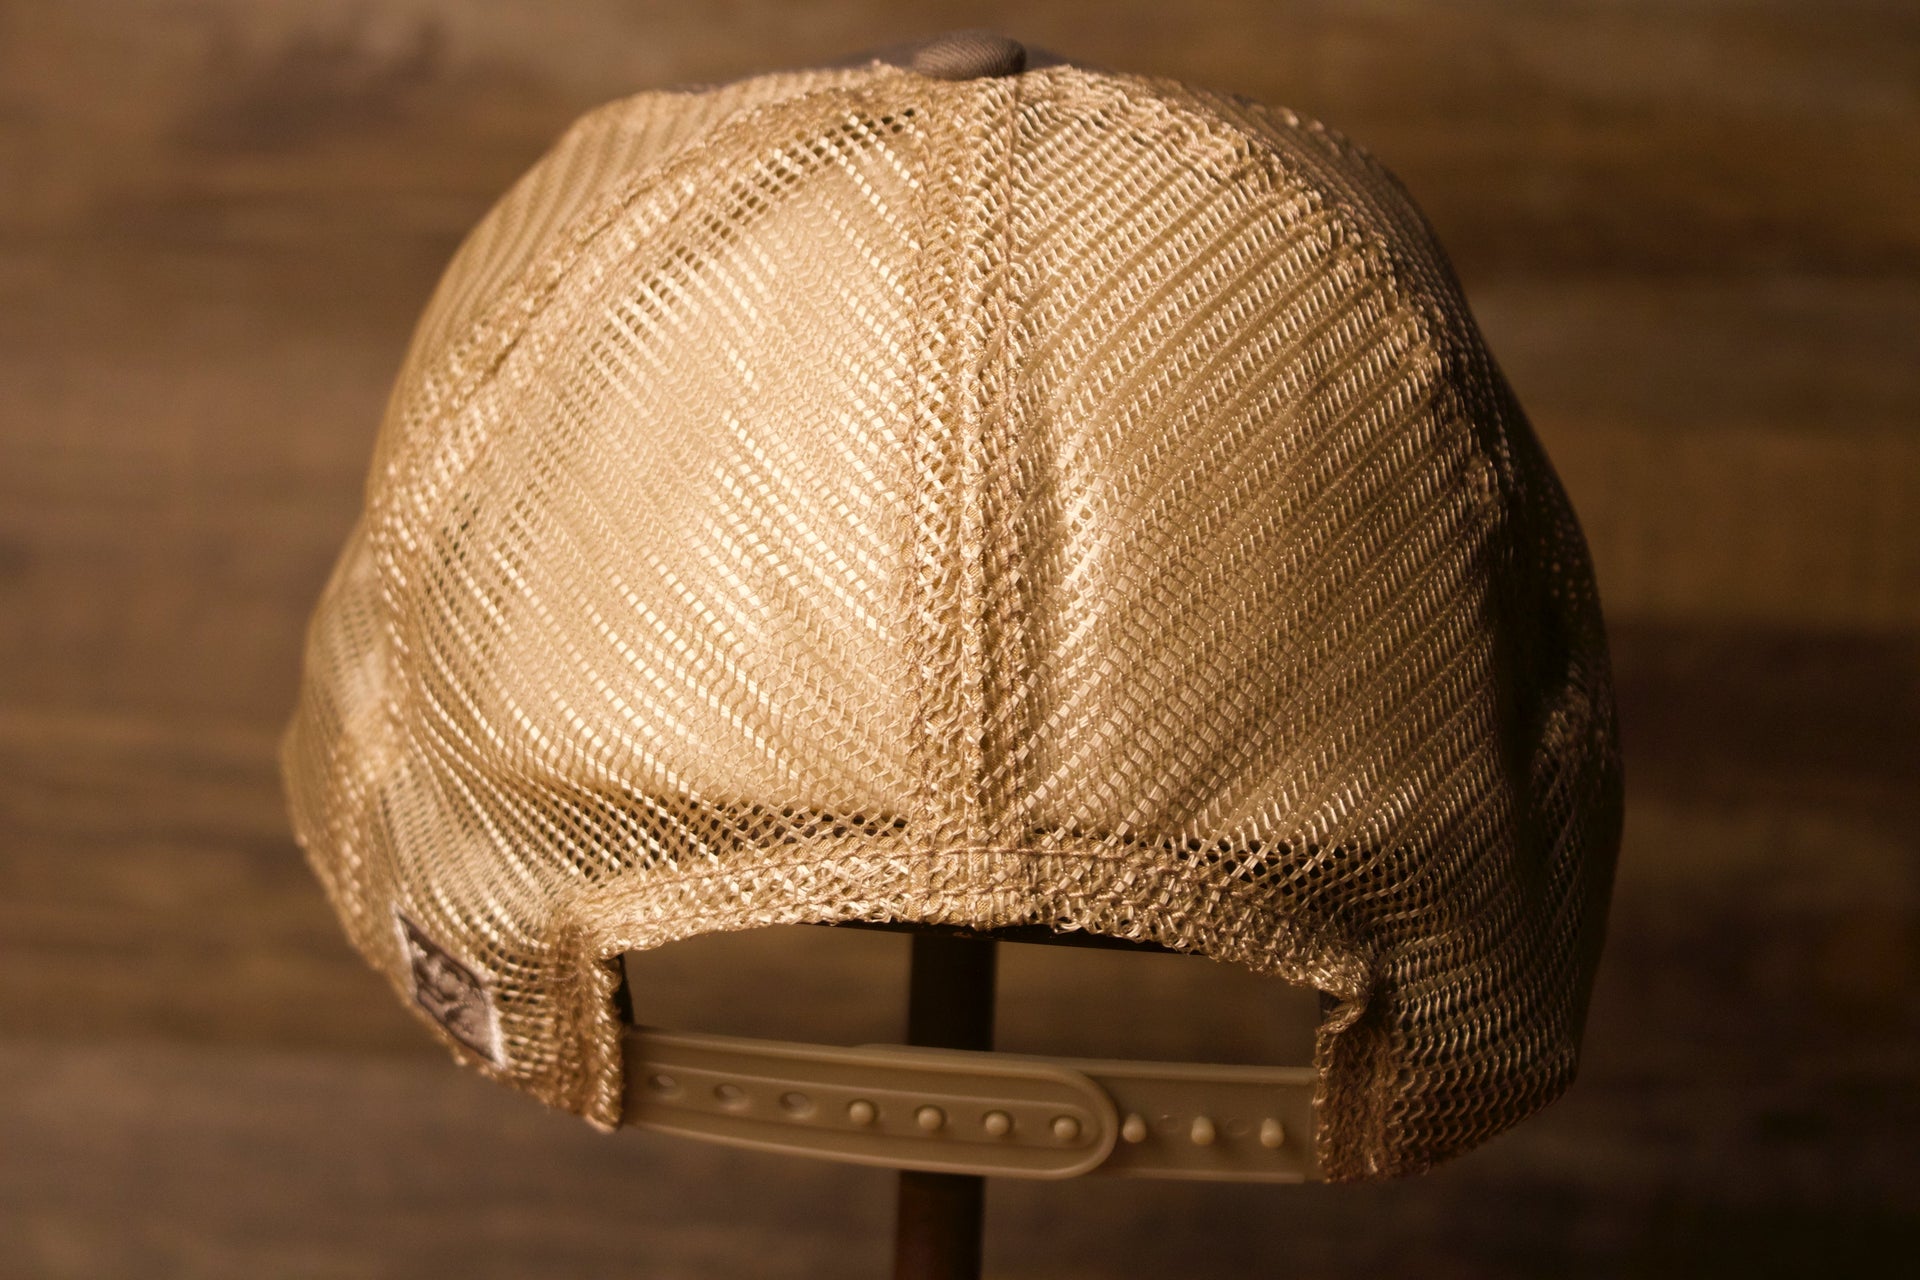 the back of this hat is a trucker style Wildwood New Jersey Charcoal / Khaki Mesh-Back Trucker Hat